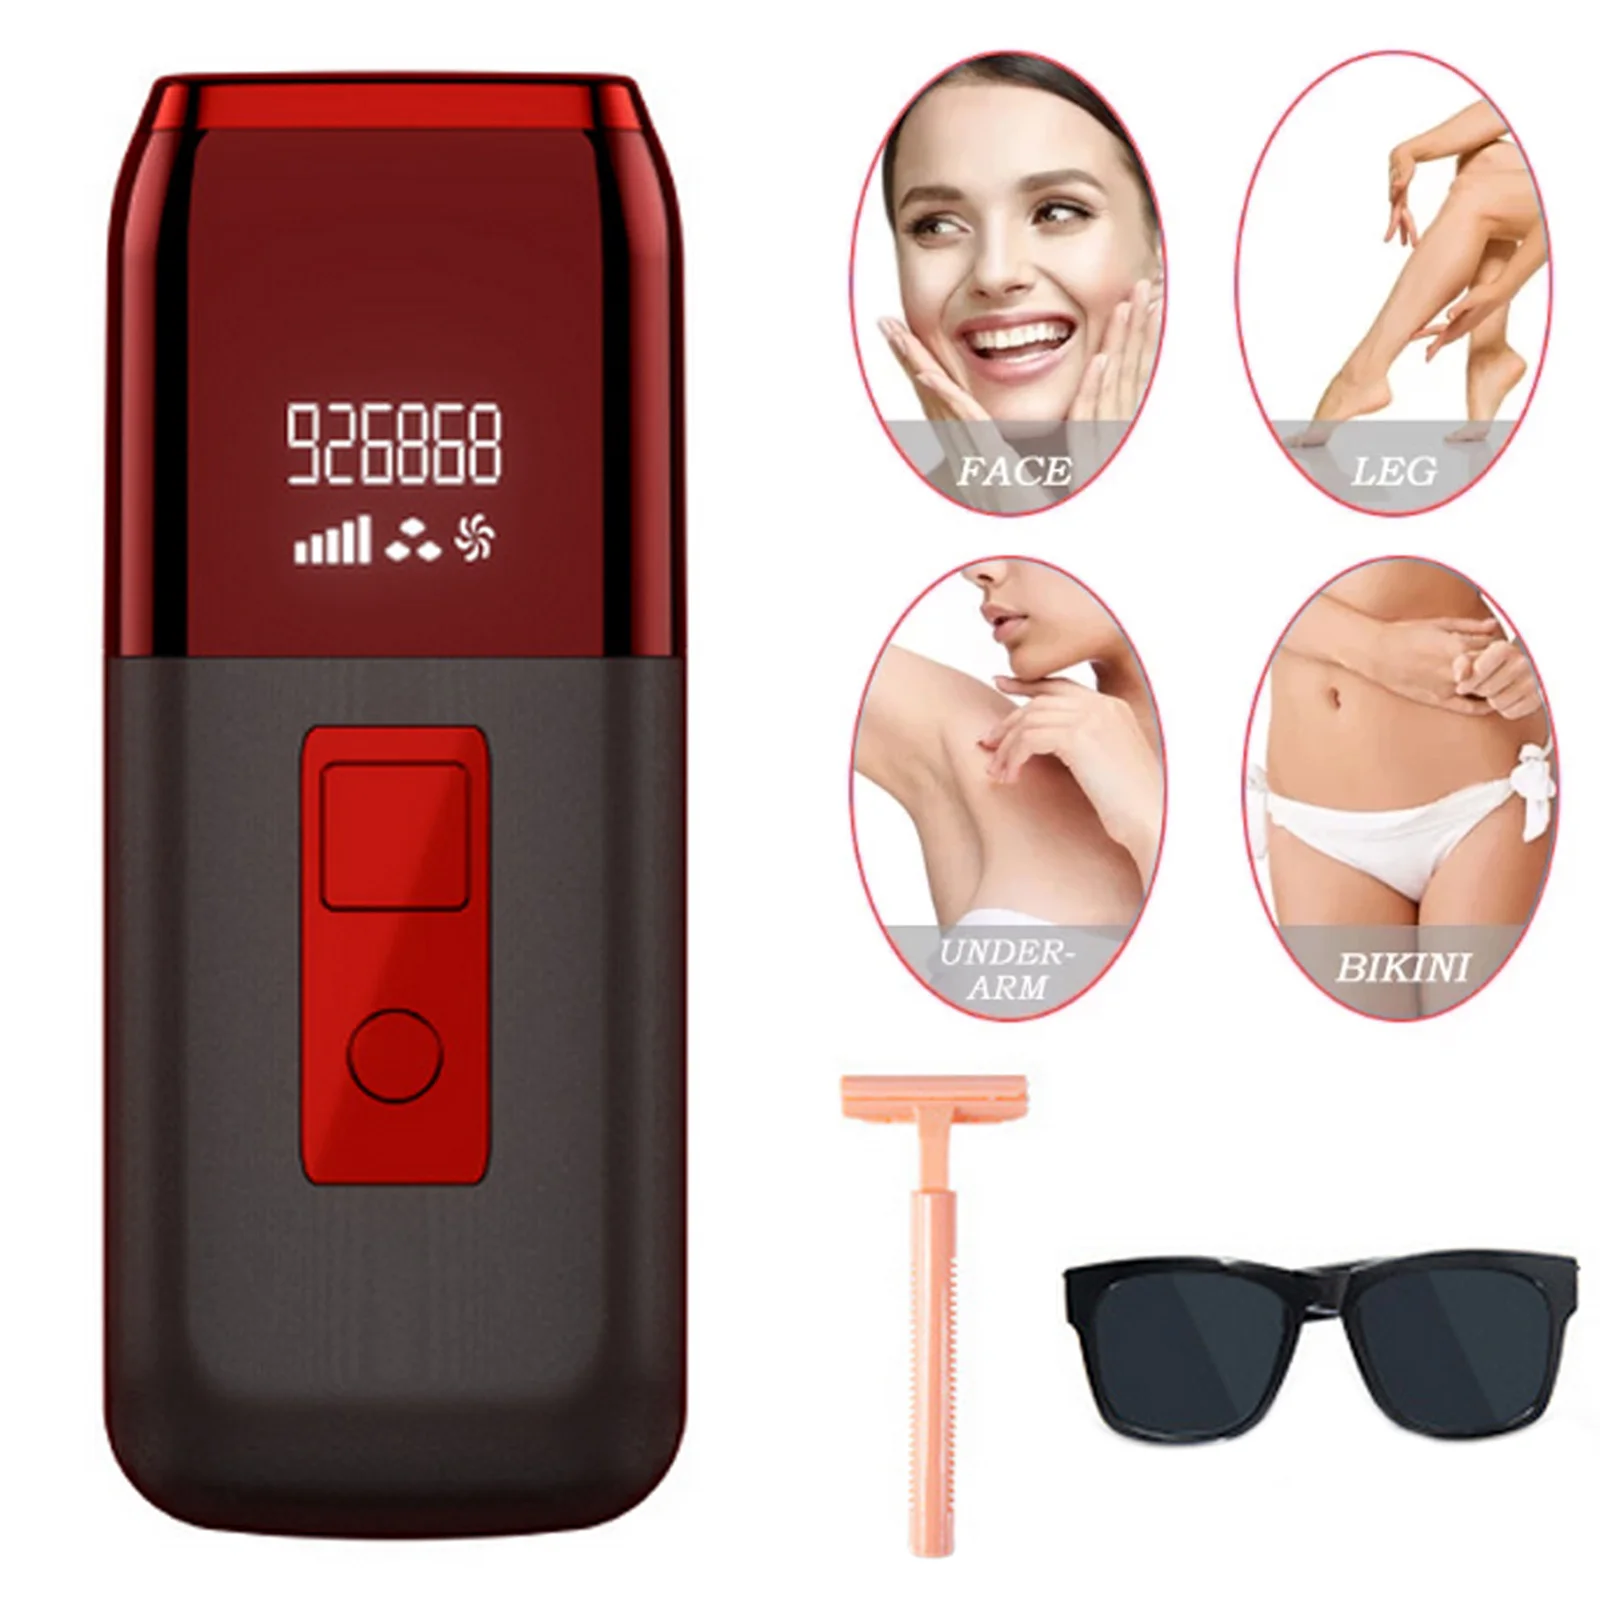 Hair Remover Portable Painless 1000000 Flashes IPL Hair Removal Device Machine with Shaver Goggles Whole Body Home Use EU Plug od7 eyepatch safety goggles for laser hair removal treatment ipl eye protective glasses 190nm 14000nm pack of 2